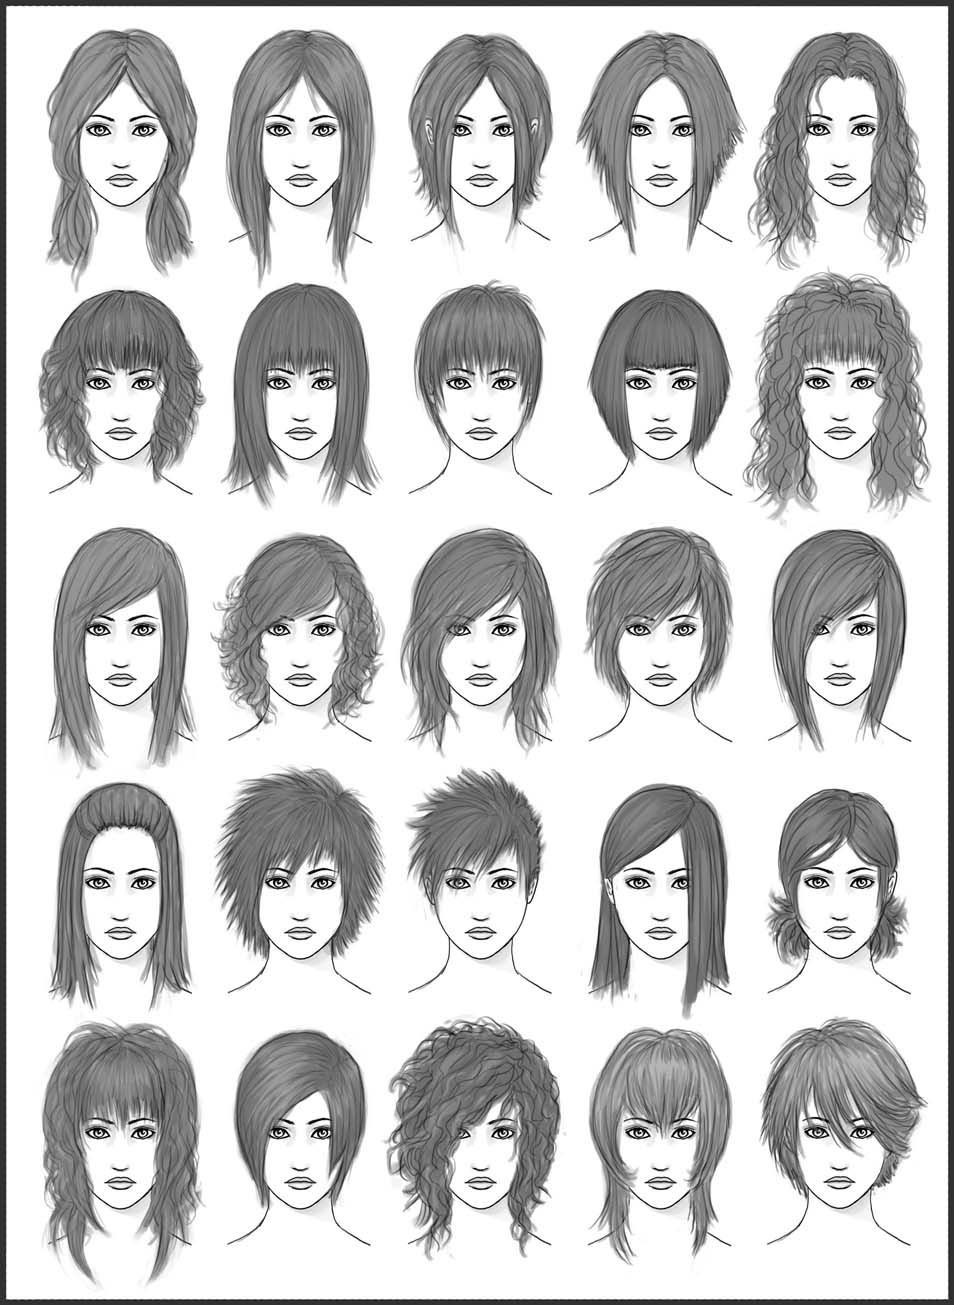 Anime Hairstyle Names Unique Women S Hair Set 2 By Dark Sheikah On Deviantart Lots Of Anime Hairstyle Names 